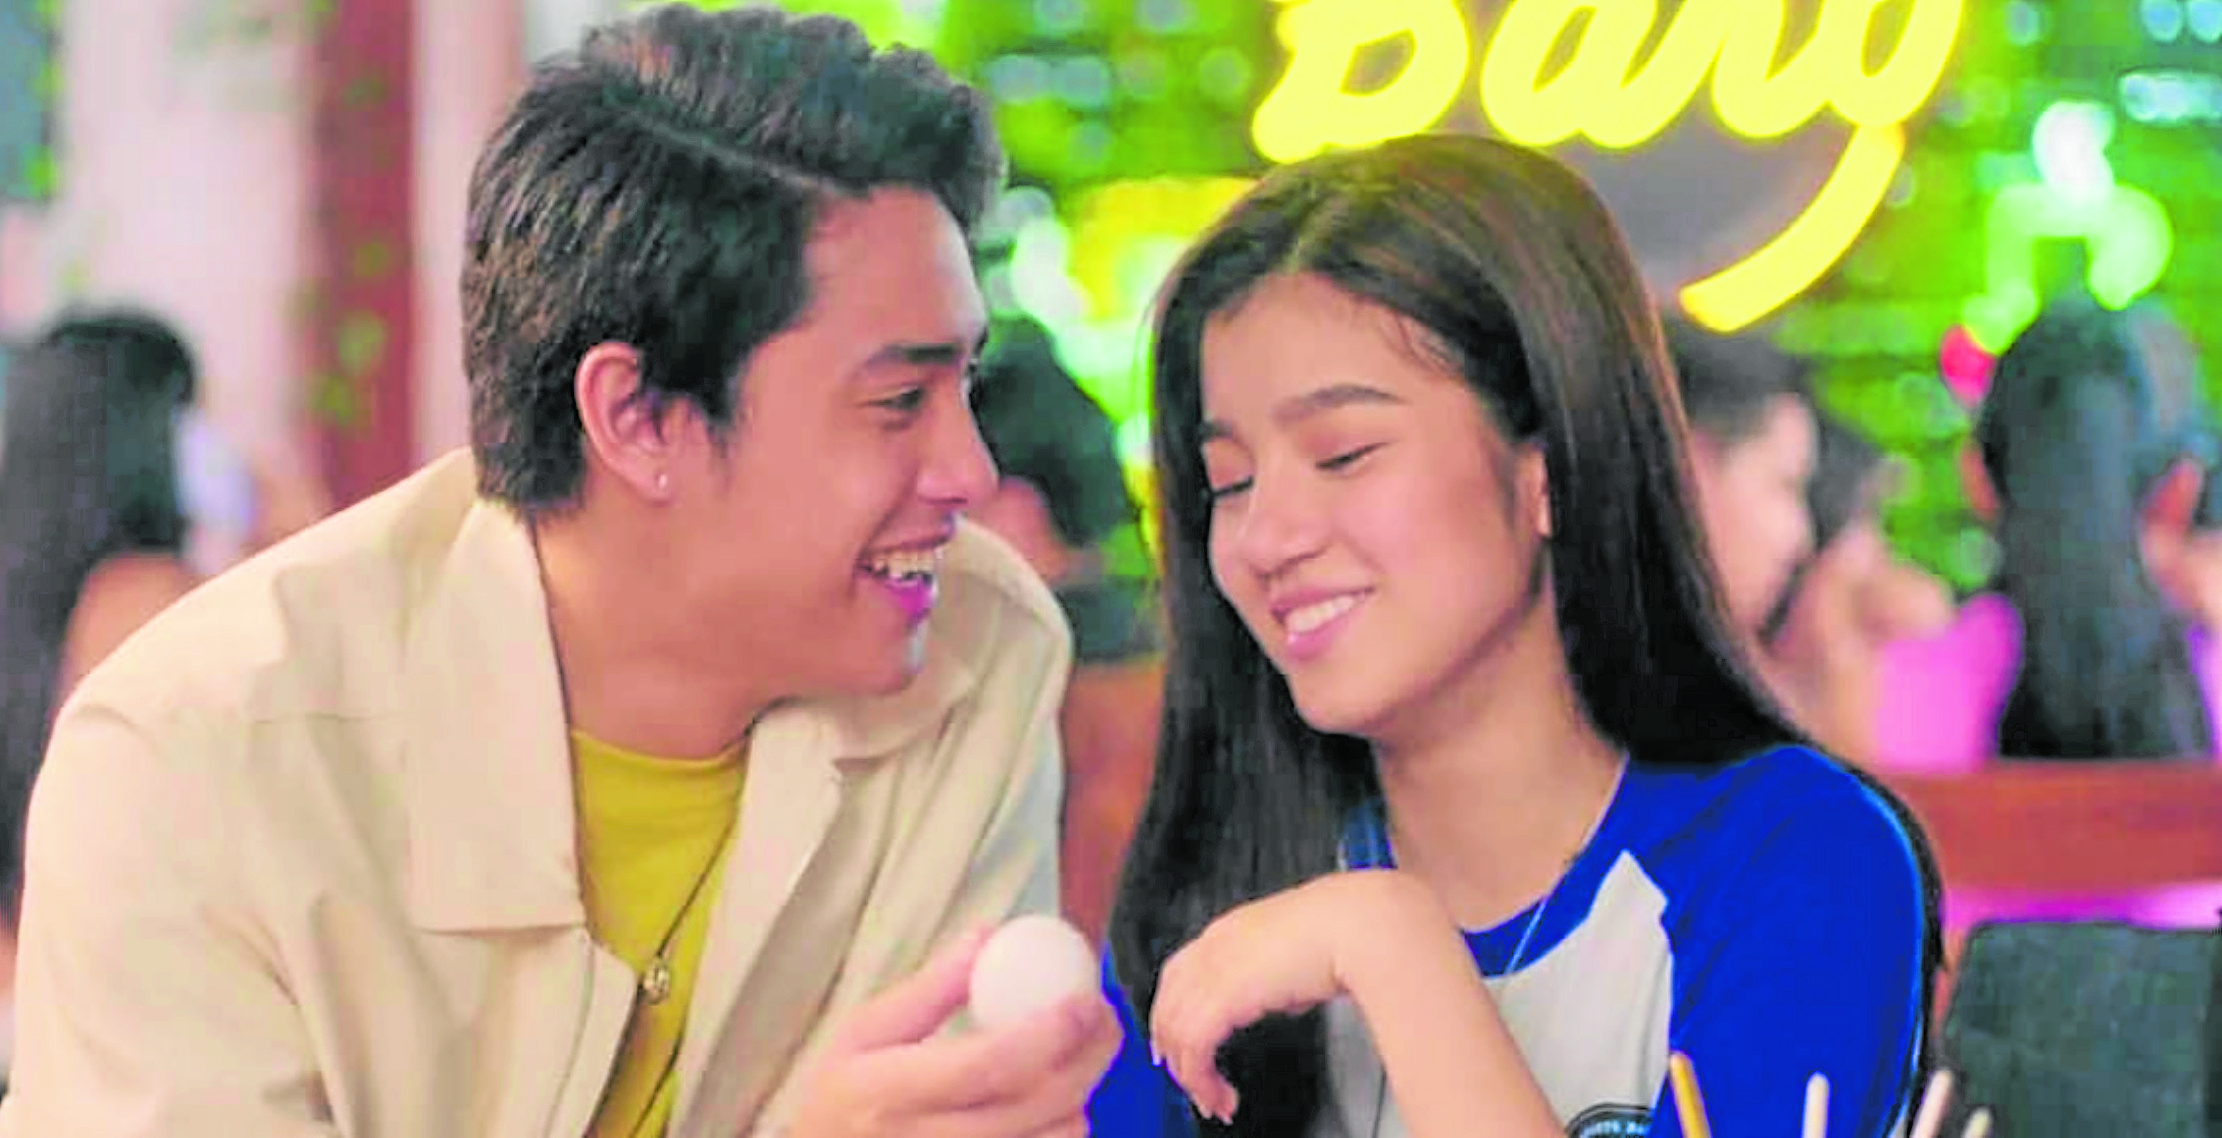 Donny Pangilinan (left) as Deib and Belle Mariano as Max